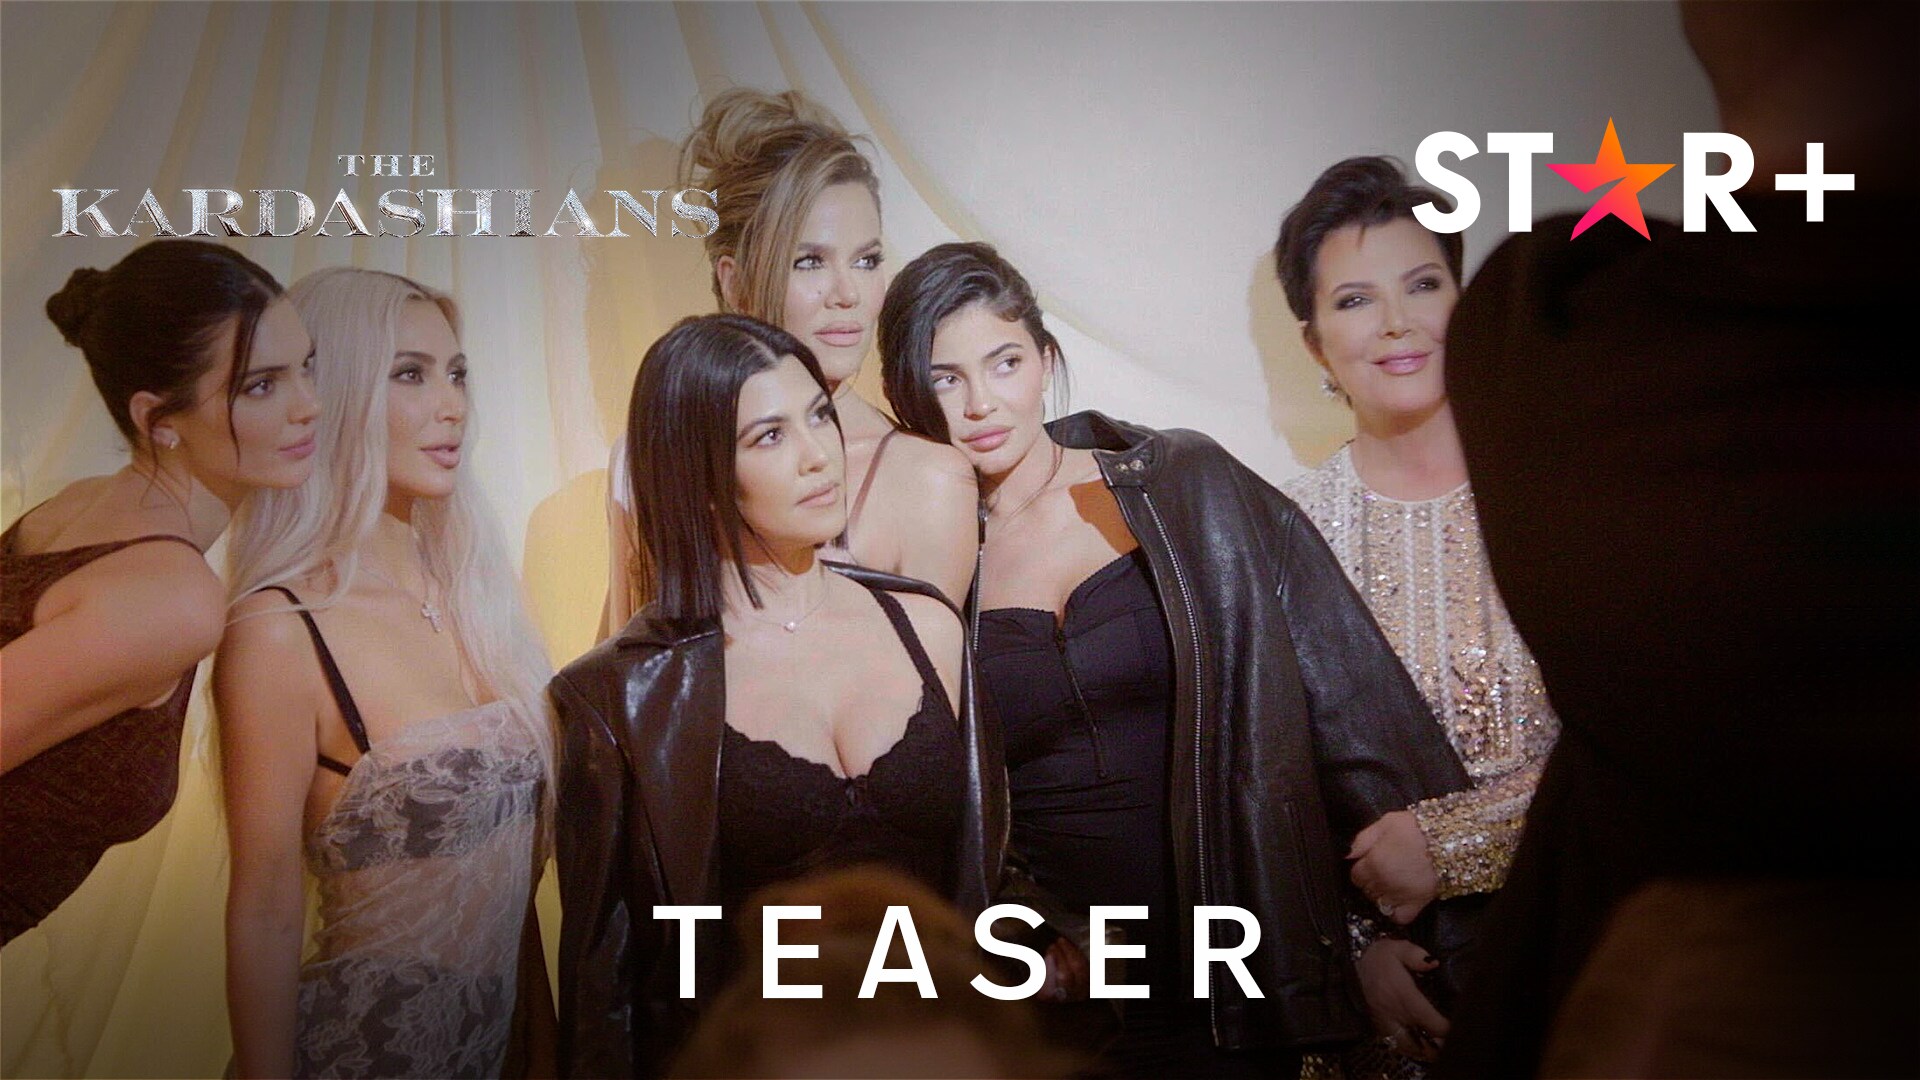 Kourtney Kardashian, Kim Kardashian, Khloe Kardashian and Kris Jenner stand next to each other looking to the left of the image, the shot features mostly their faces. 'The Kardashians' title is in the top left of the image, the 'Disney+' logo is in the top right and 'Official Trailer' is in the foreground.